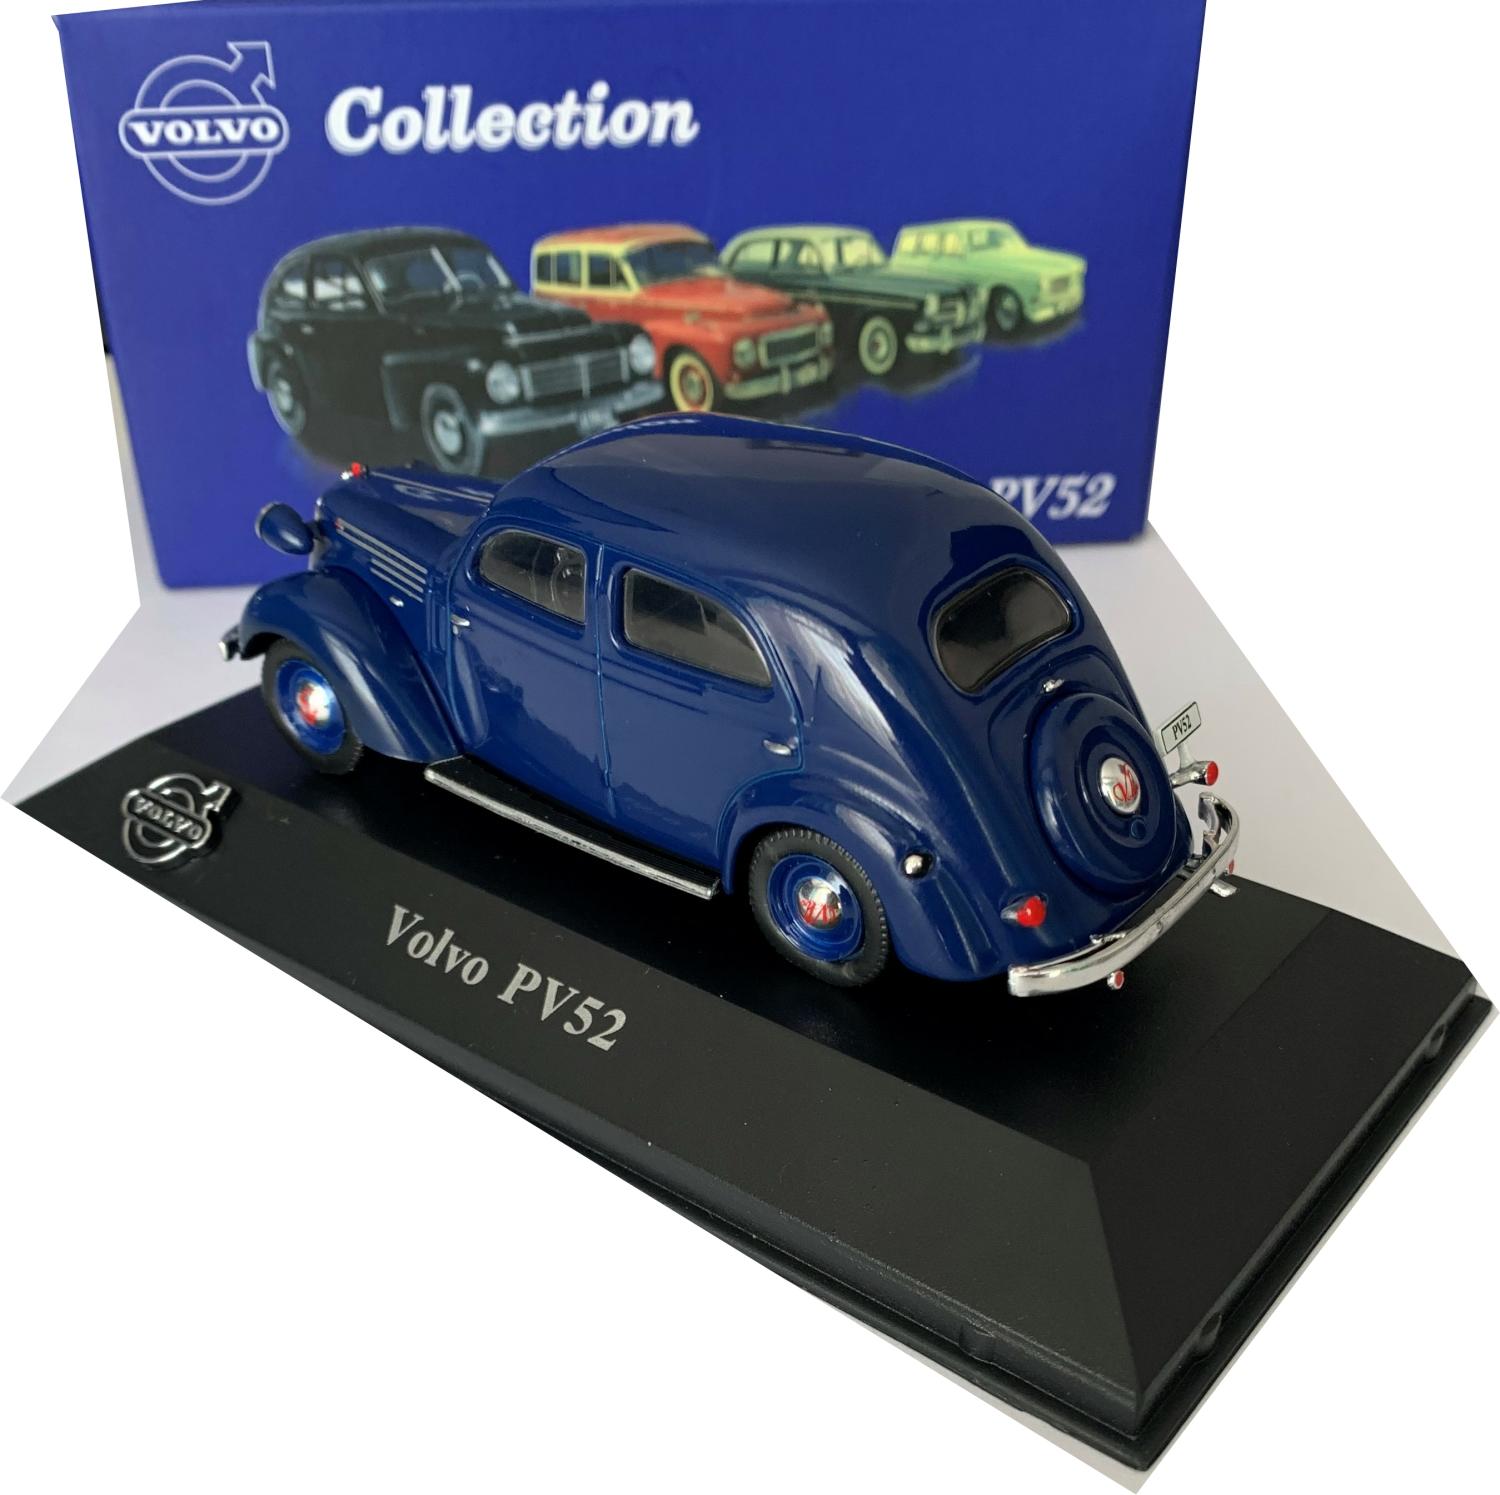 Volvo PV52 in blue 1:43 scale